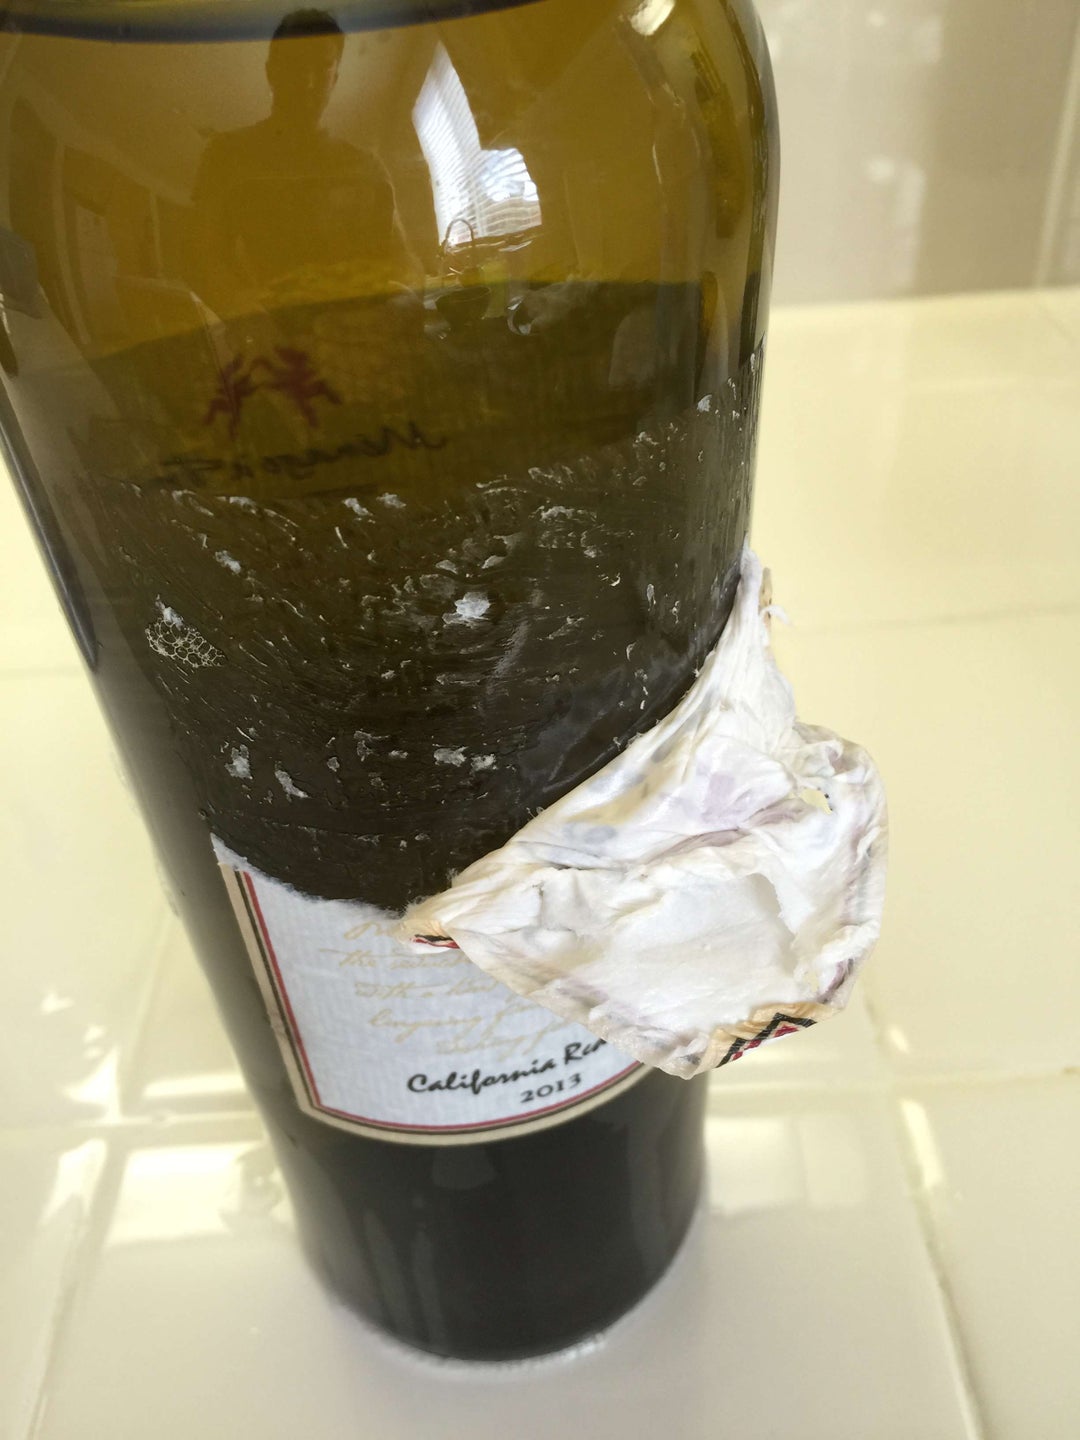 How to remove the label and adhesive from a wine bottle ...